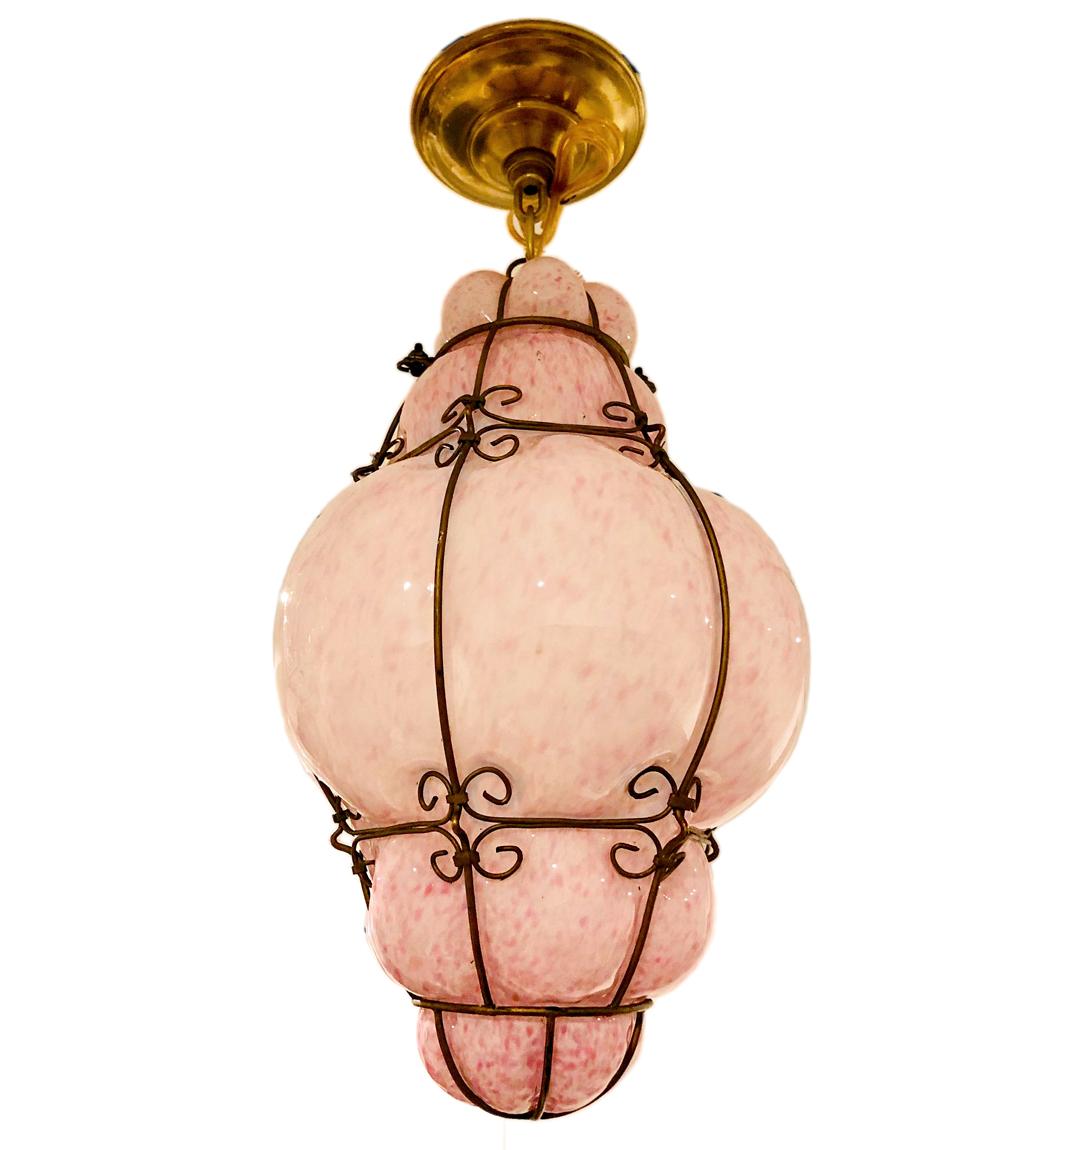 A circa 1930's pink blown Murano glass lantern with iron frame.

Measurements:
Drop: 16